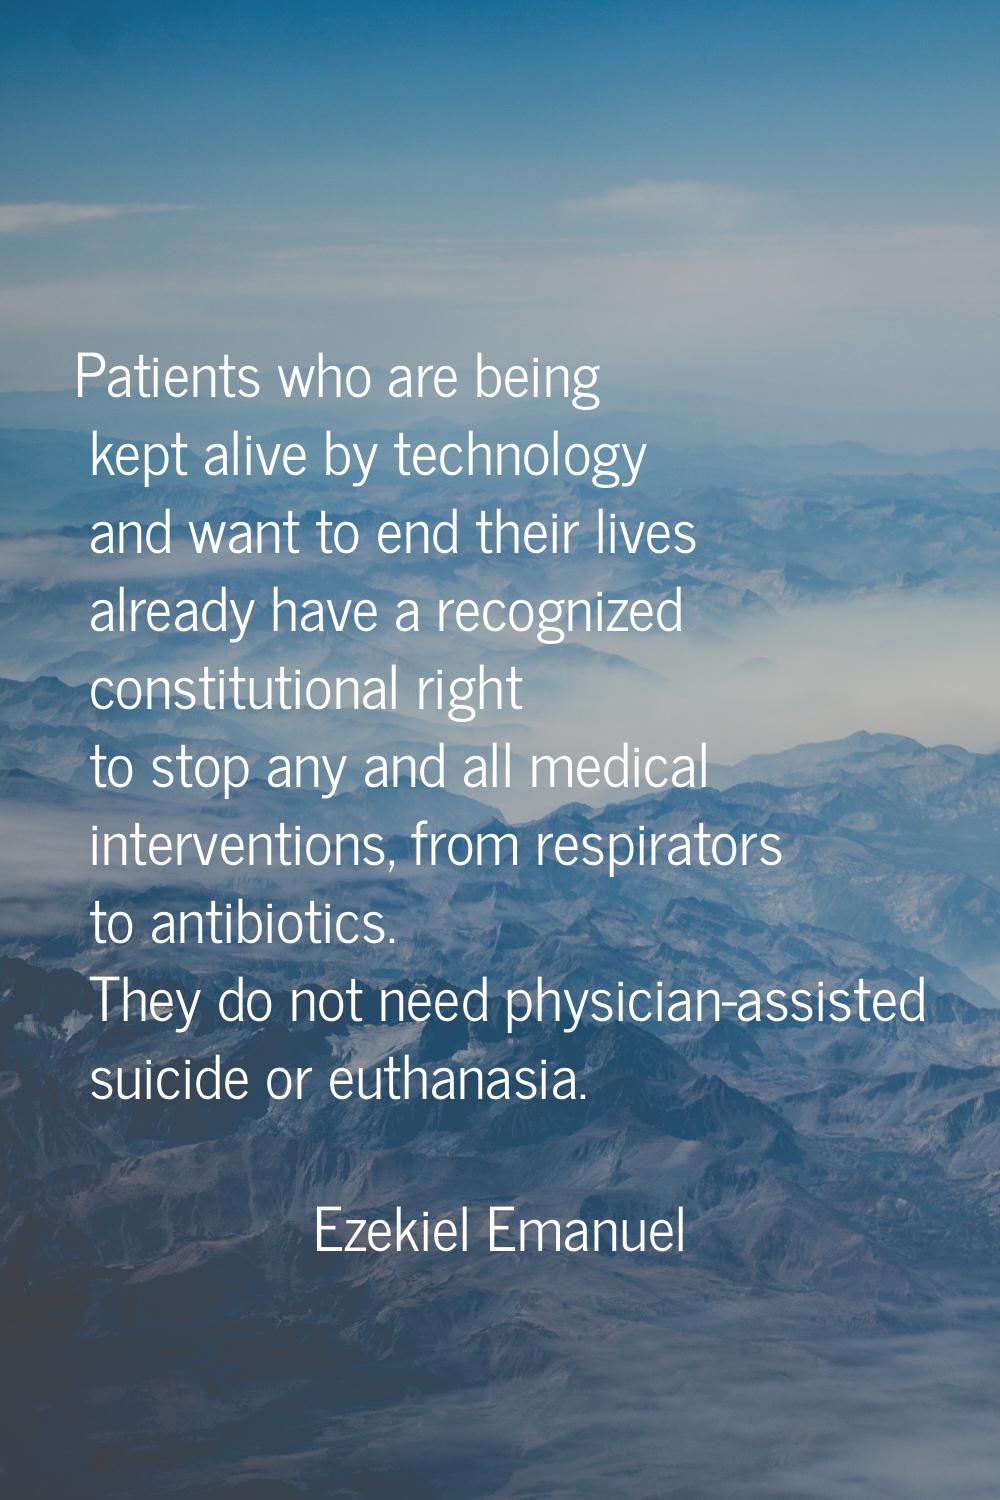 Patients who are being kept alive by technology and want to end their lives already have a recogniz